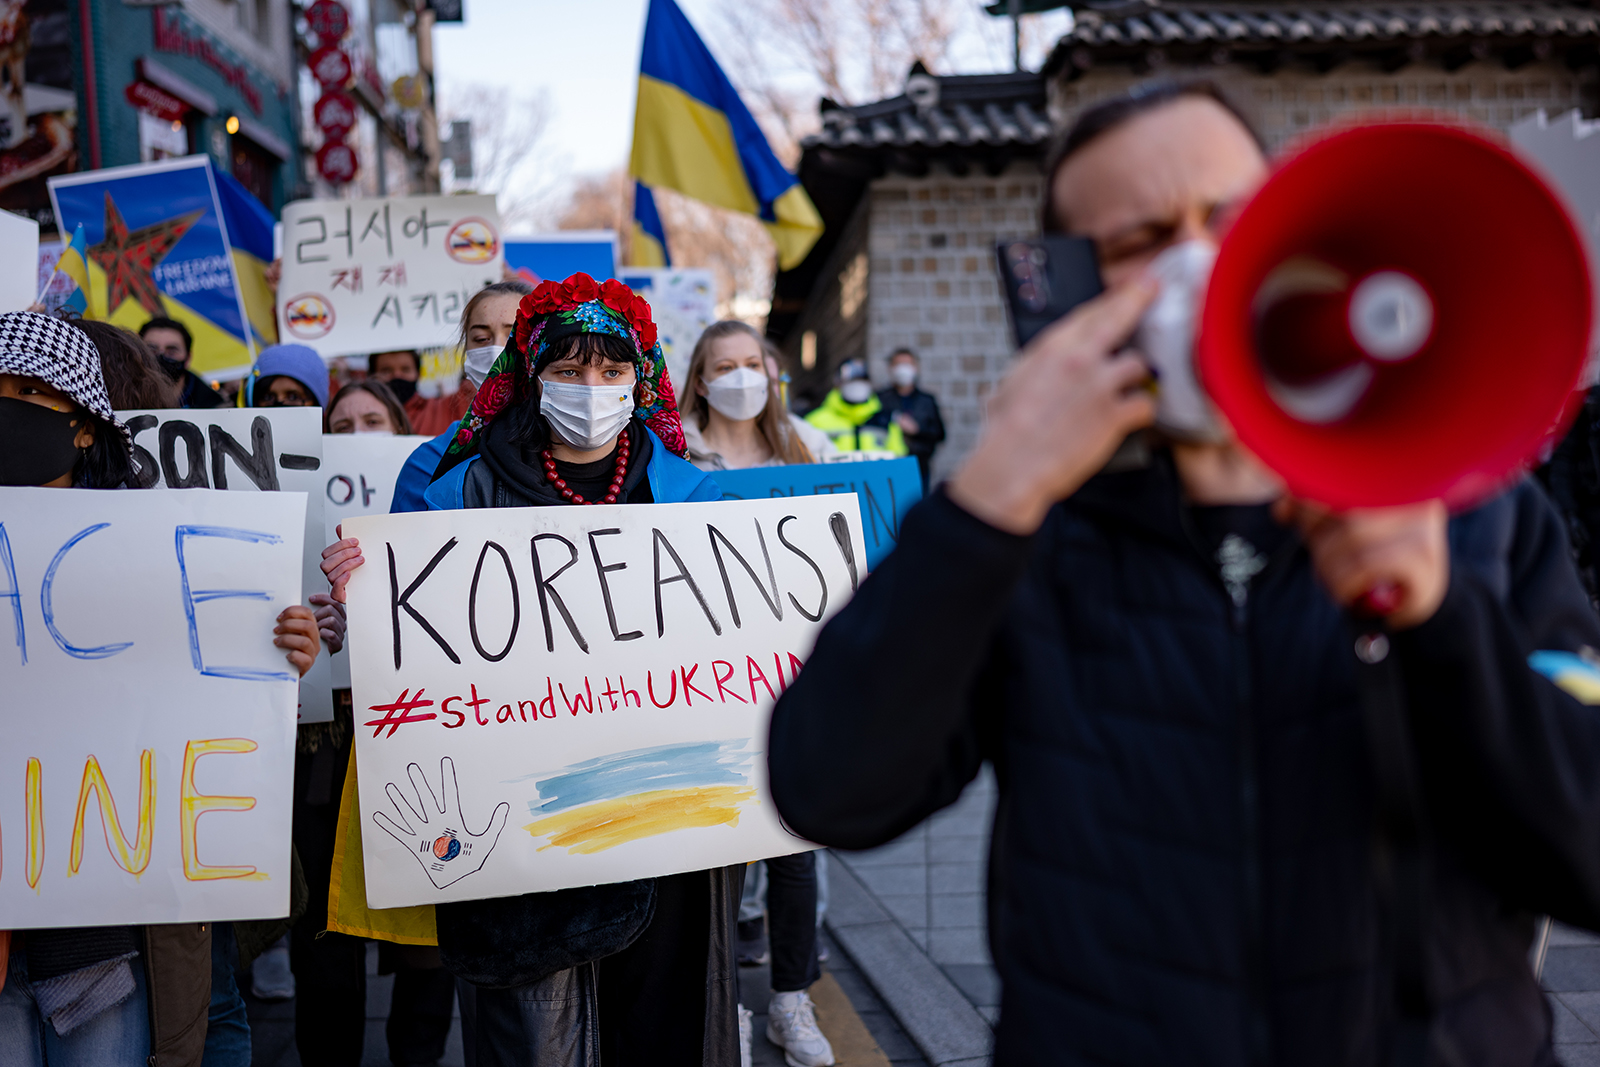 Protesters demonstrate outside of the Russian Embassy in Seoul on February 27, in Seoul, South Korea.